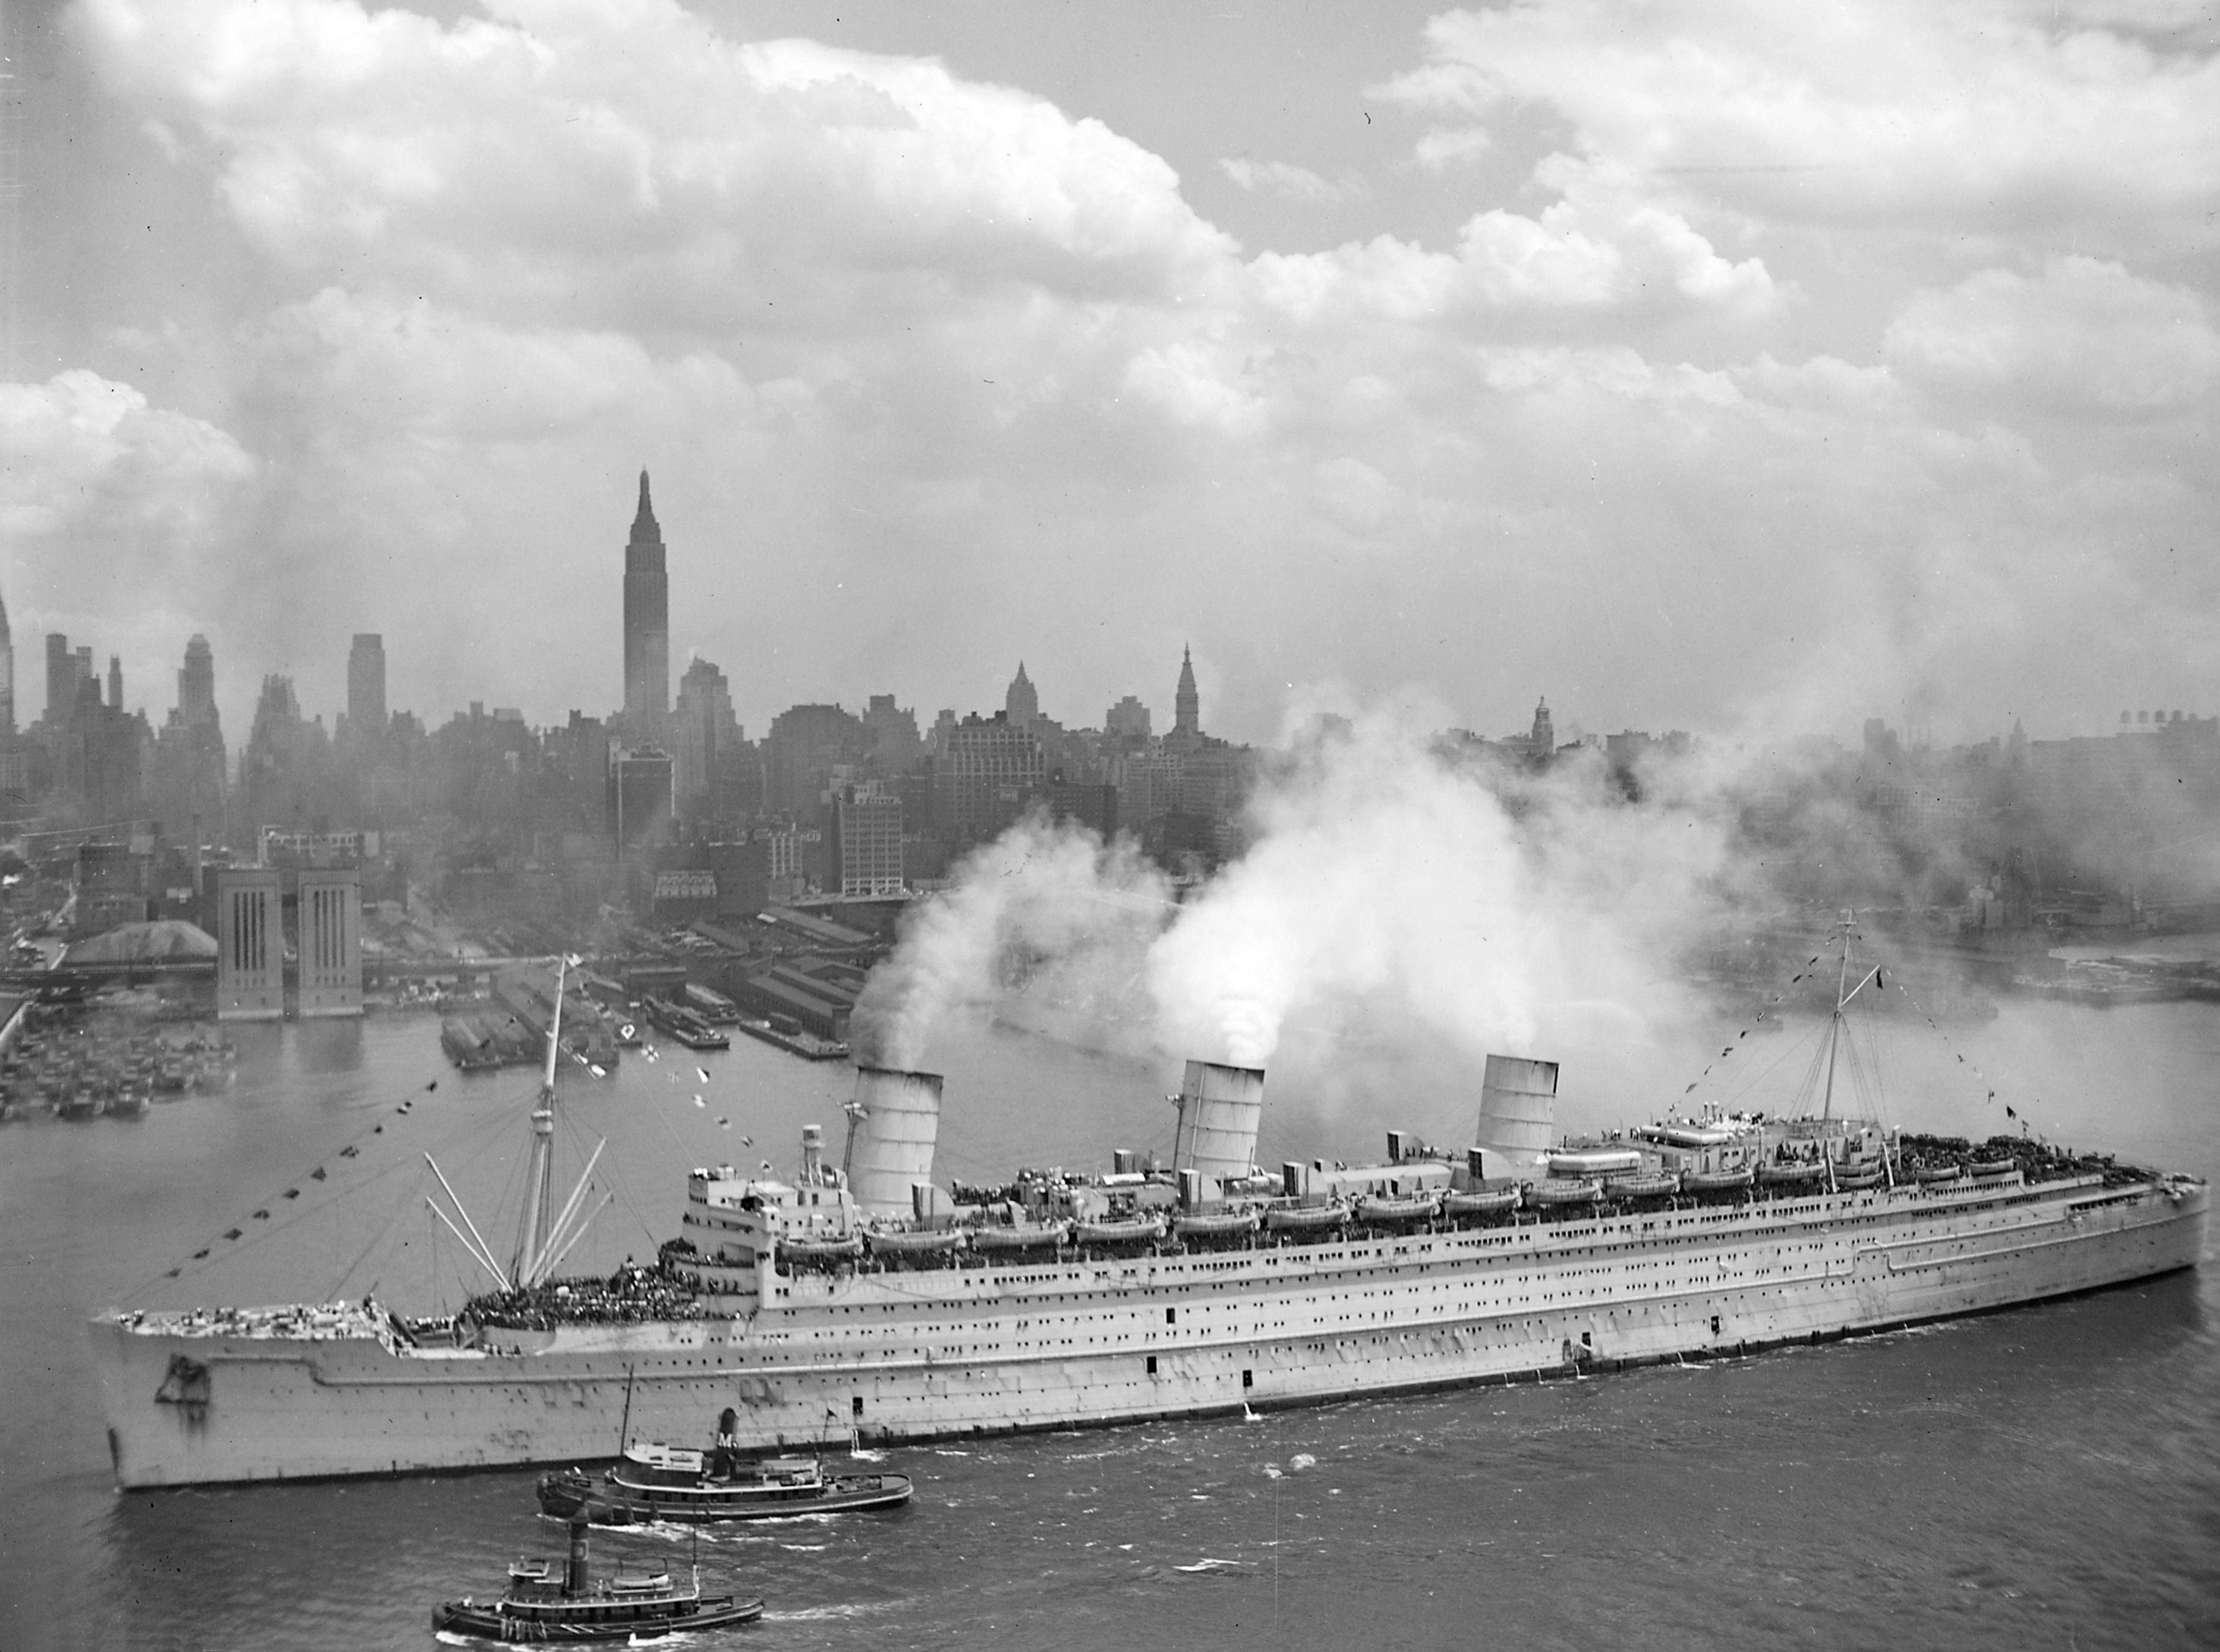 British liner RMS Queen Mary returning US troops from Europe, New York, New York, United States, 20 Jun 1945